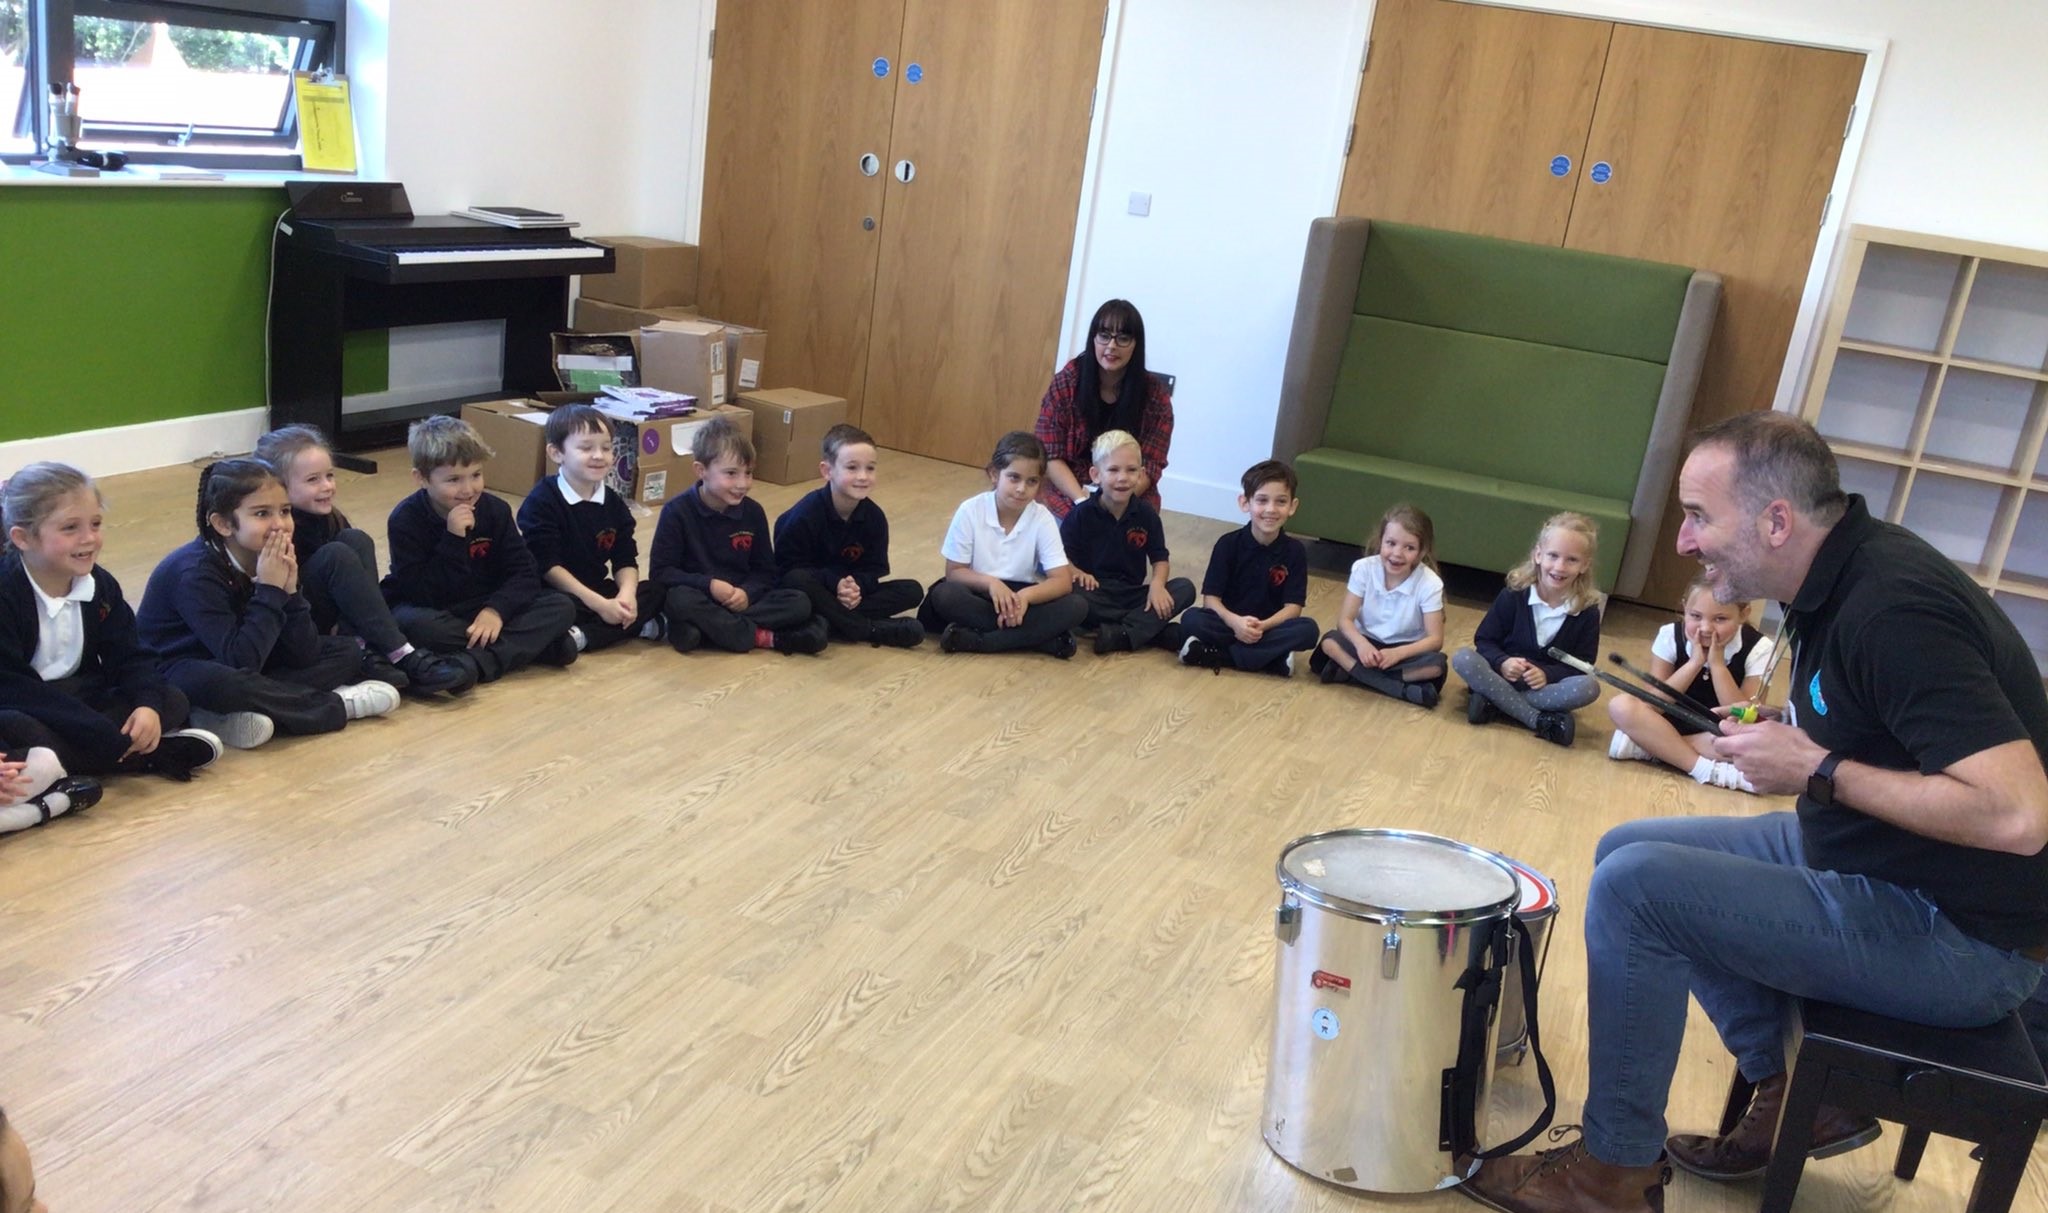 A group of young school children smiling and sat in a semi-circle on a wooden floor, watching a performer play the drums.